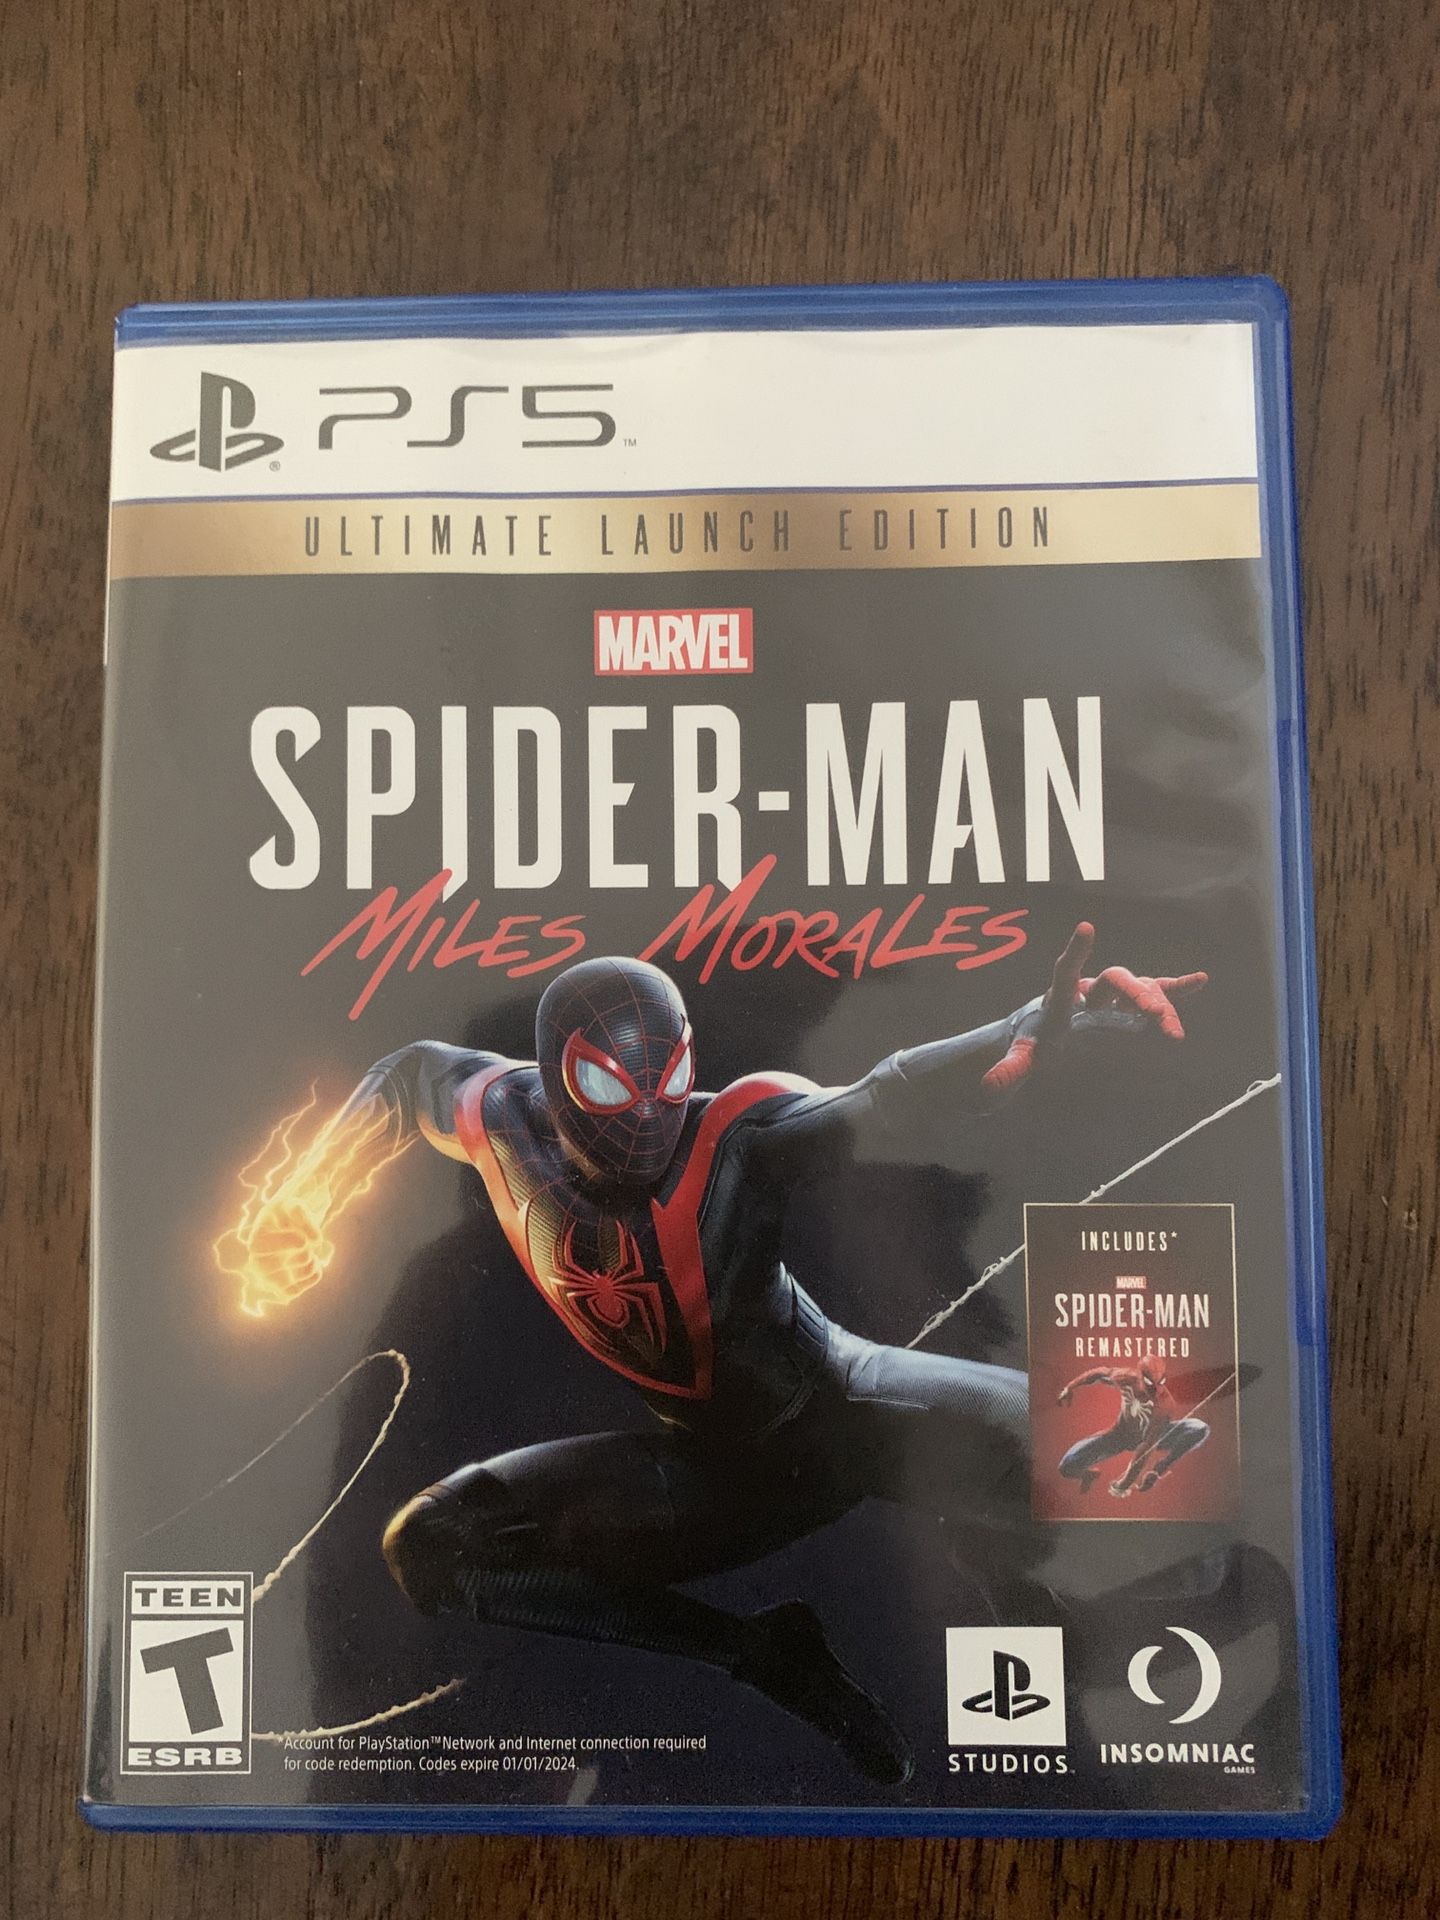 PS5 - Marvel's Spider-Man: Miles Morales Ultimate Launch Edition - No Code